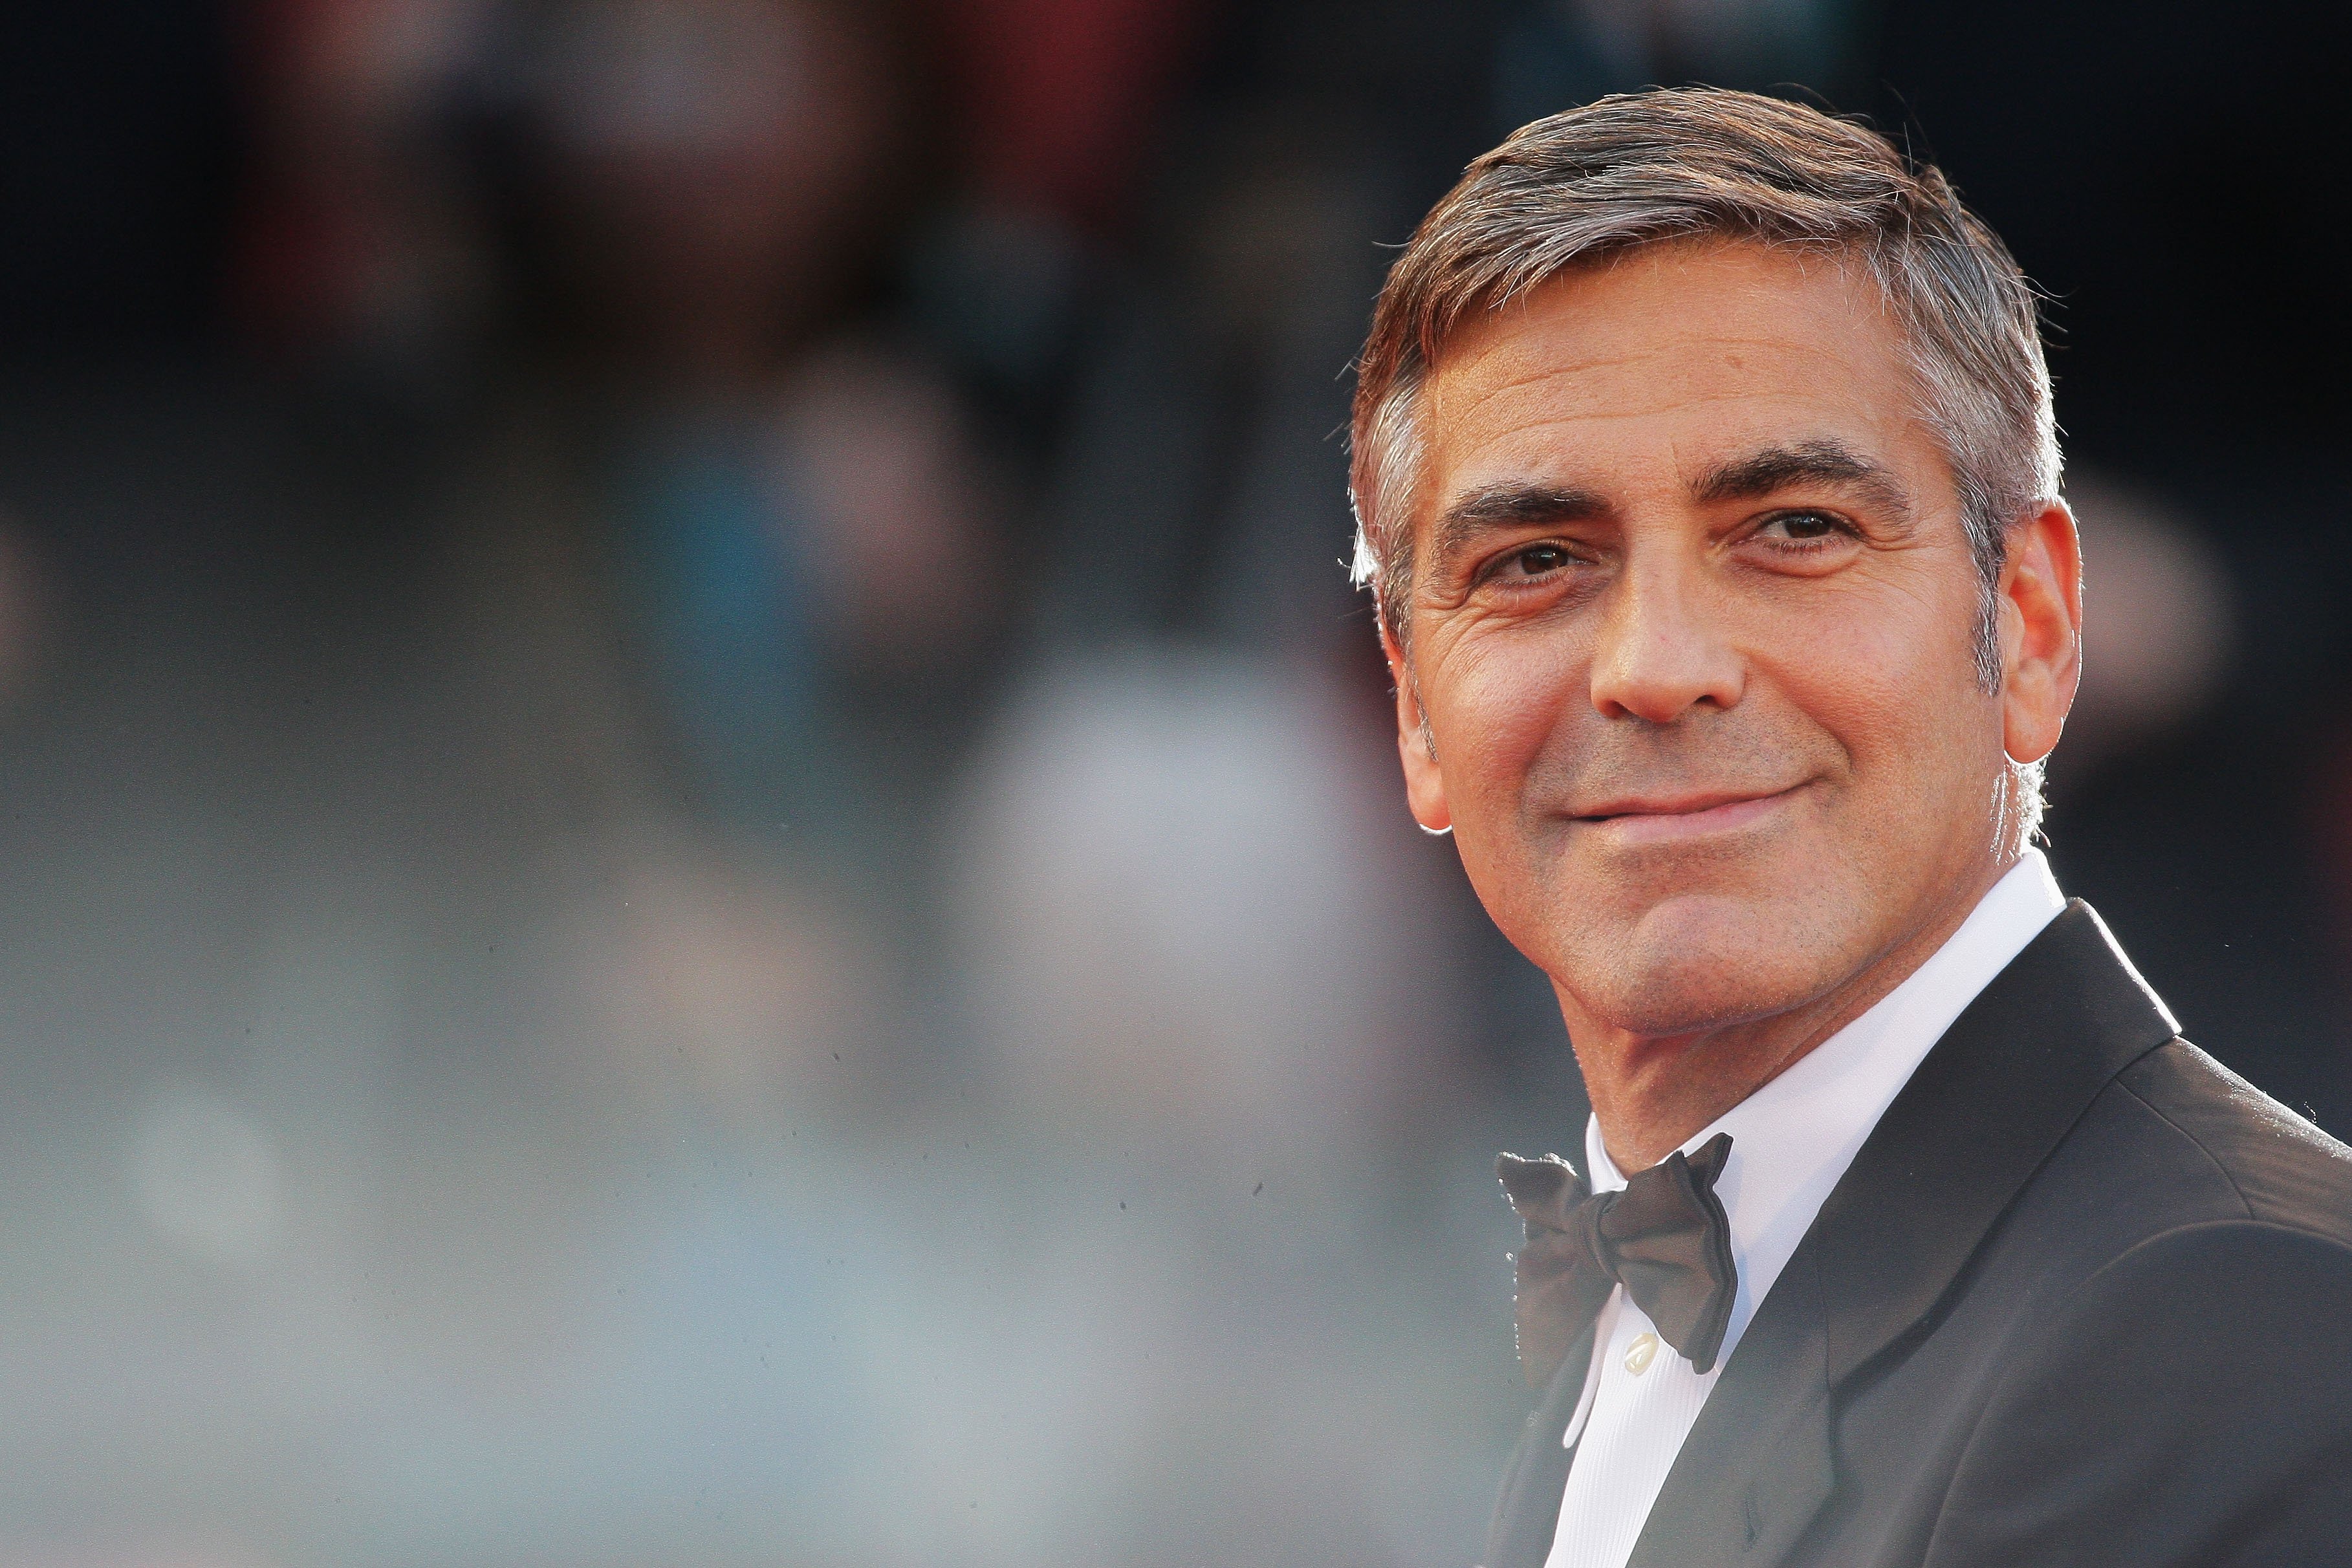 George Clooney at "The Men Who Stare At Goats" premiere at the Sala Grande during the 66th Venice Film Festival on September 8, 2009 in Venice, Italy | Source: Getty Images